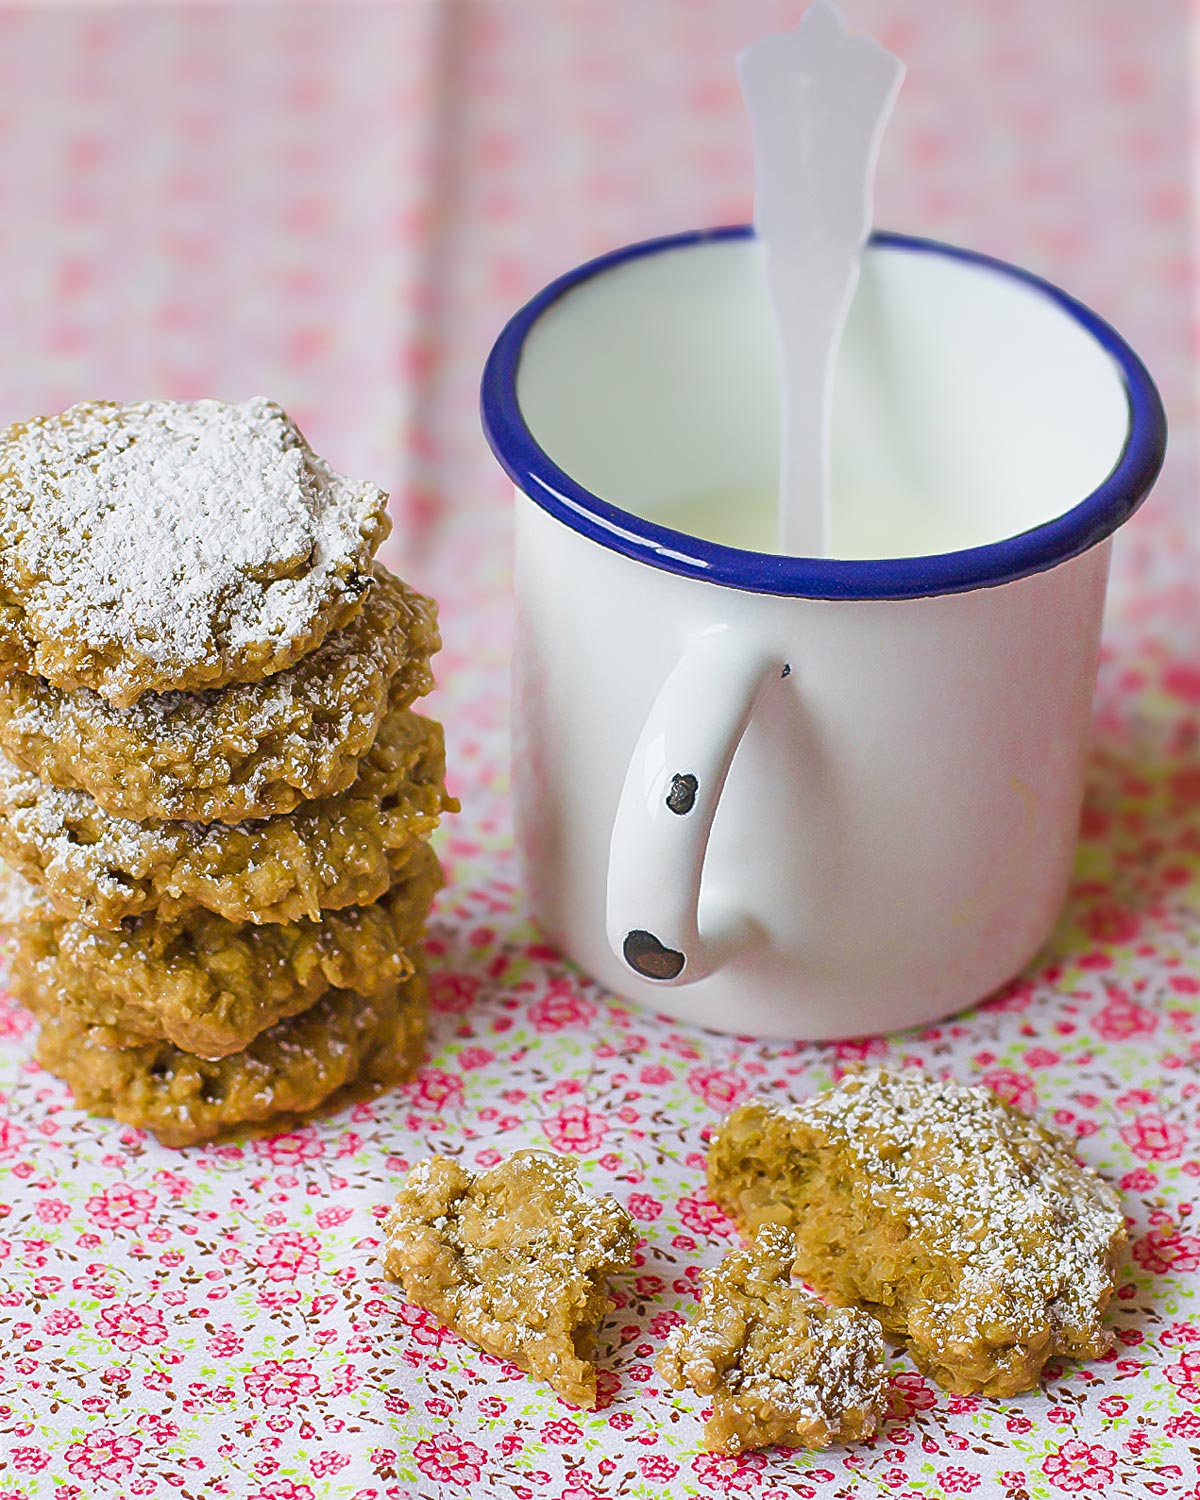 oatmeal and almond cookies